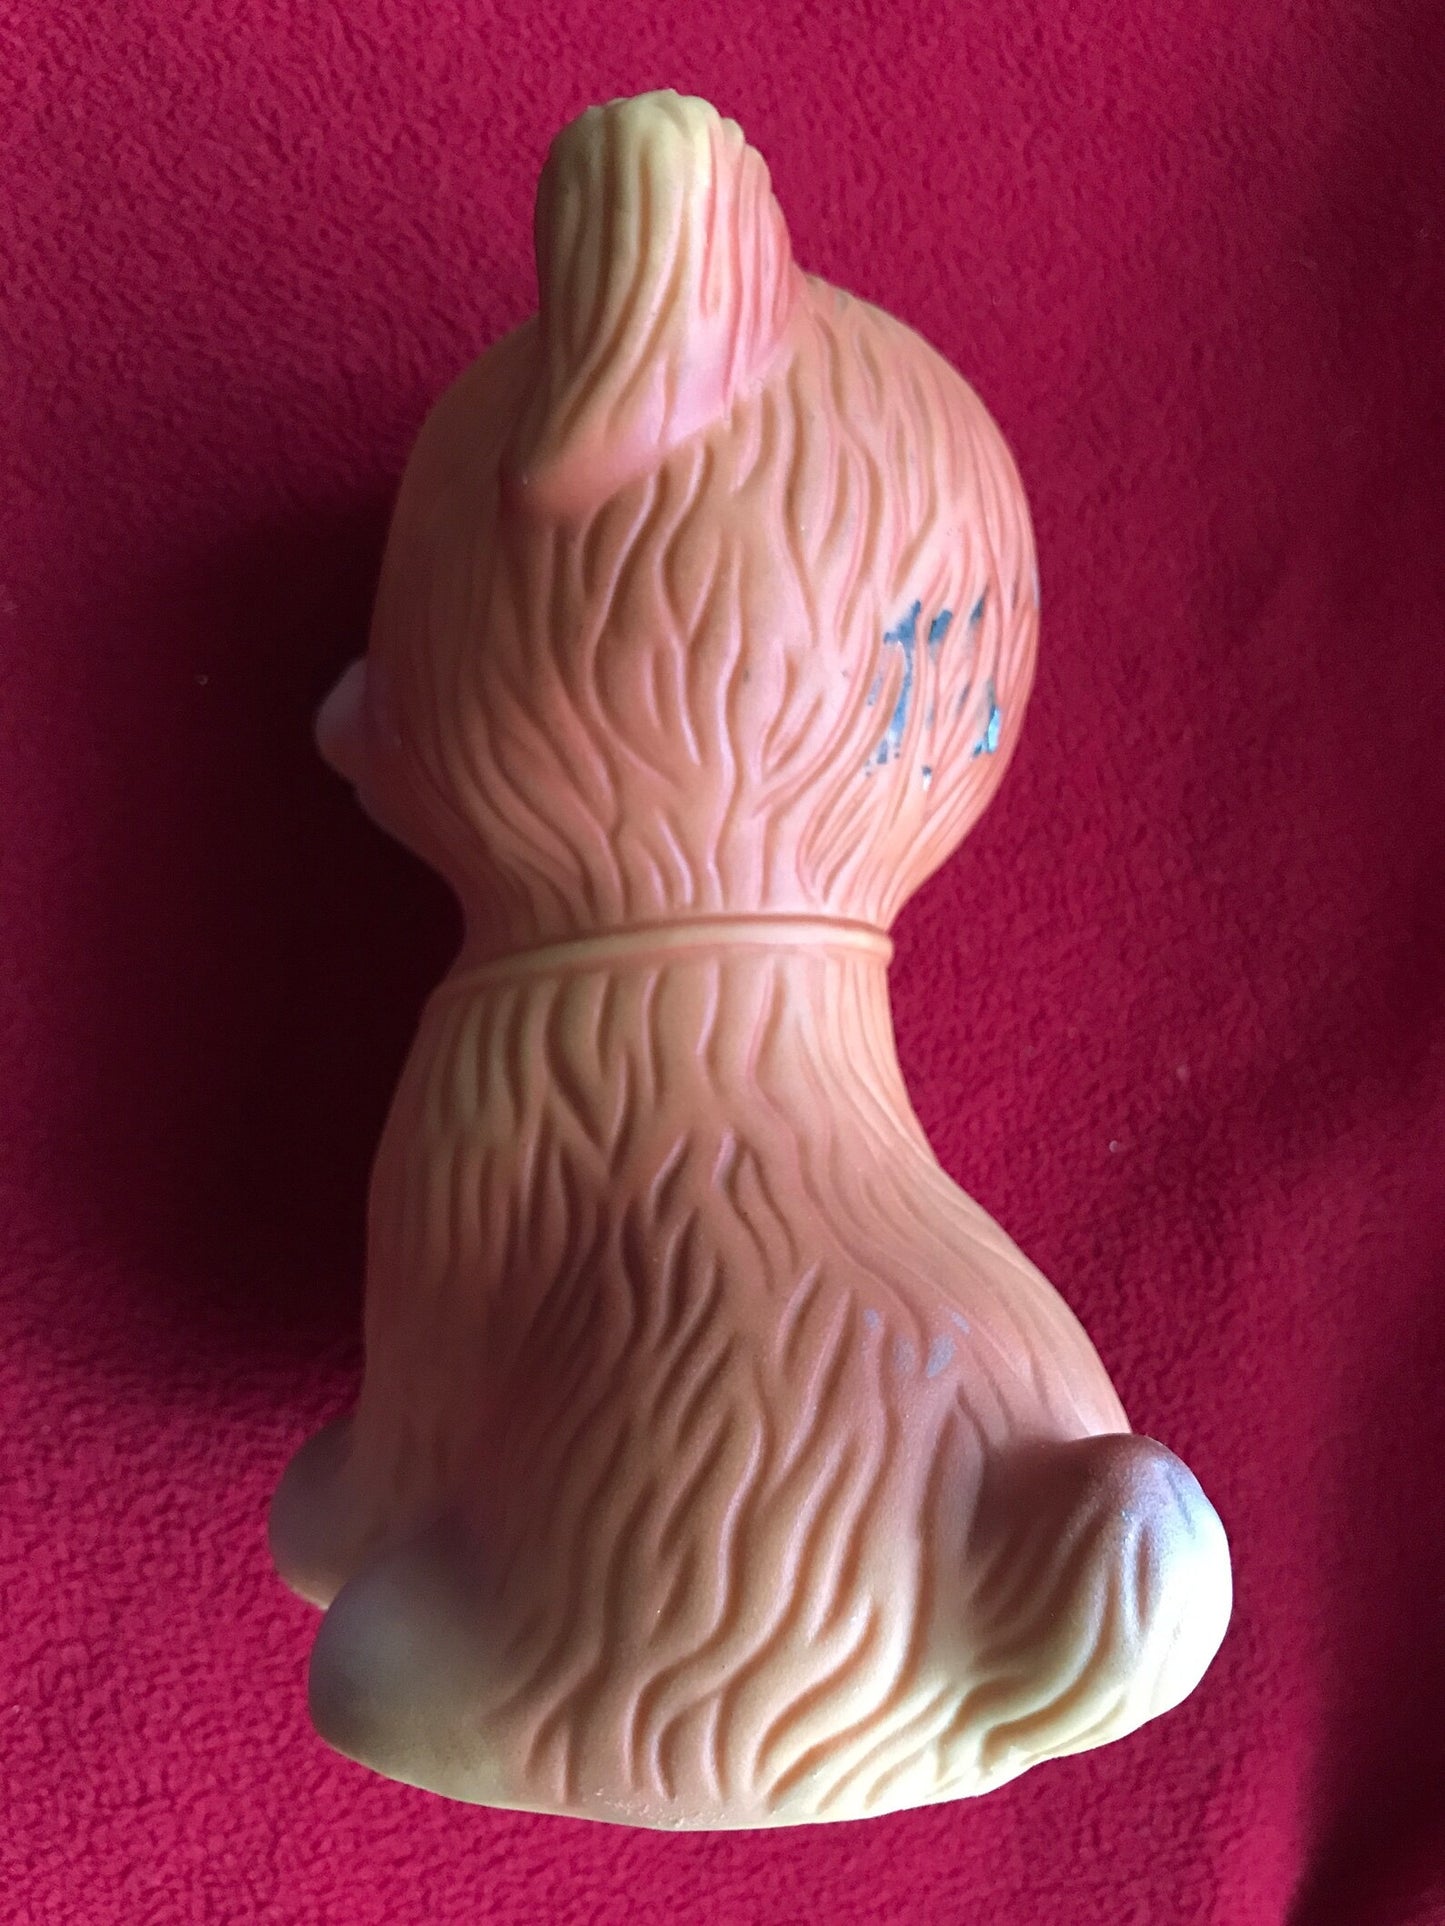 Rare find! Vintage 1970s rubber toy - sitting DOG with medal - Made in Soviet Union - Lovely USSR retro toy - Collectible vintage toy.